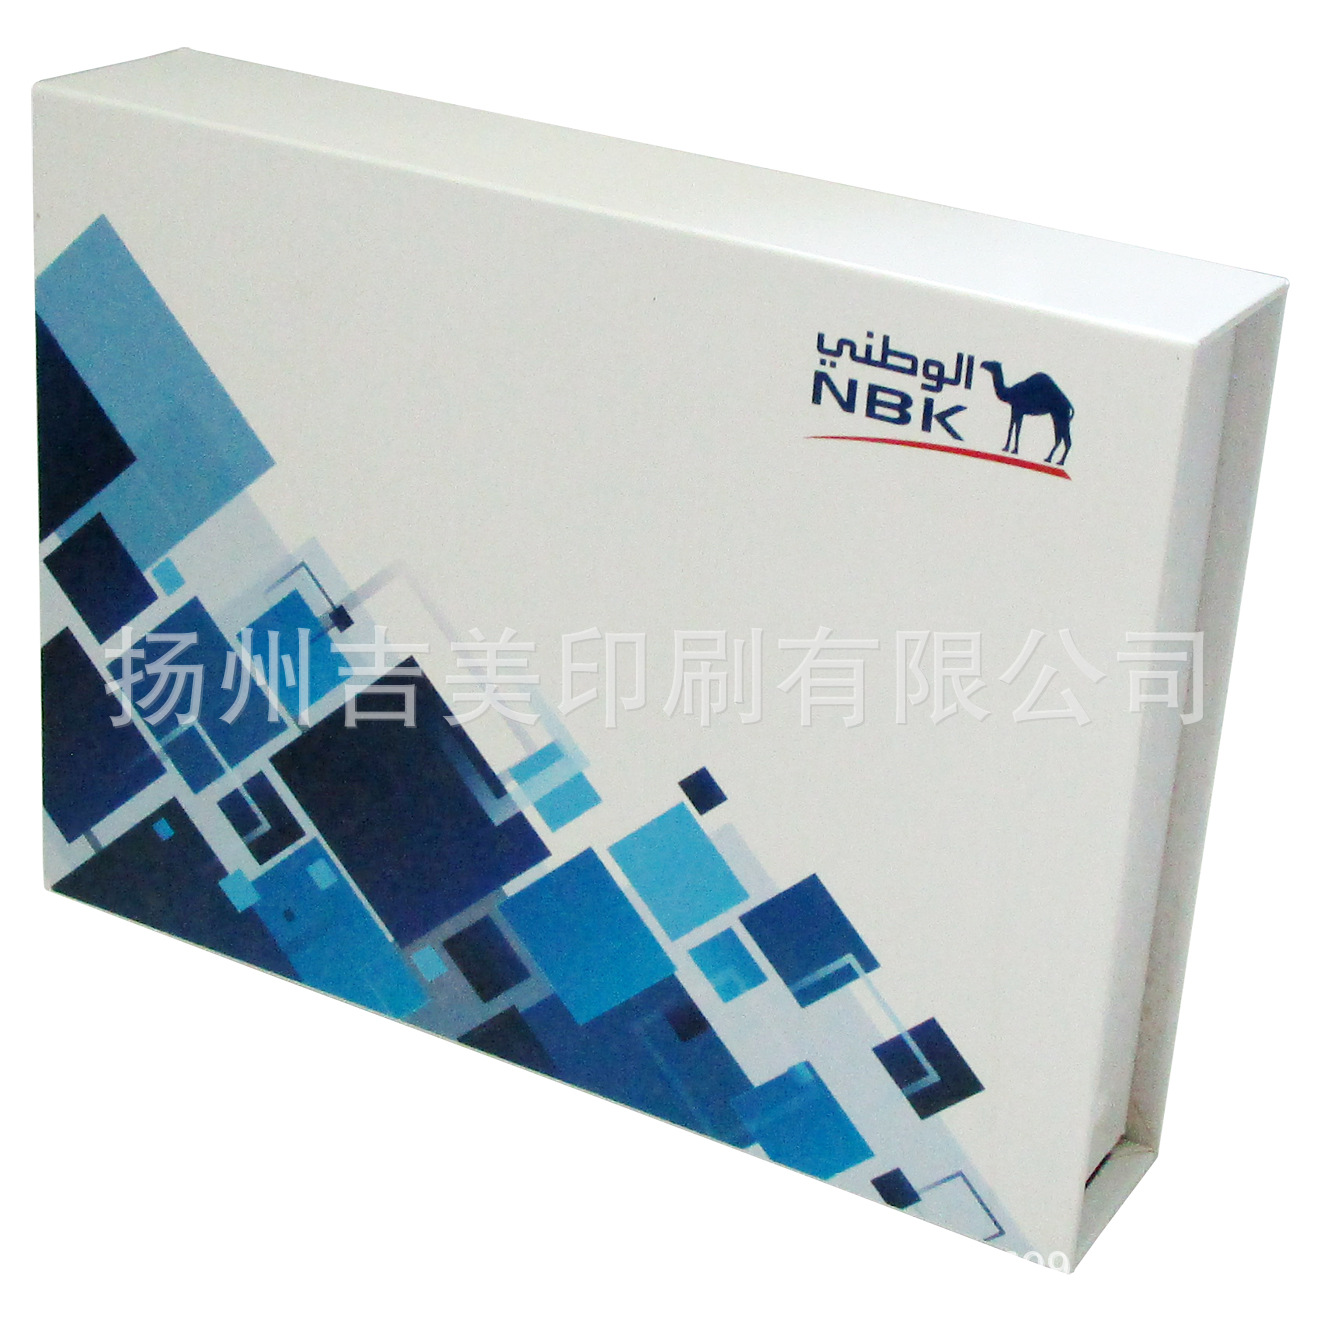 Gift box poker Manufactor Cheap customized advertisement Promotion Gift box Foreign trade Plastic PVC poker